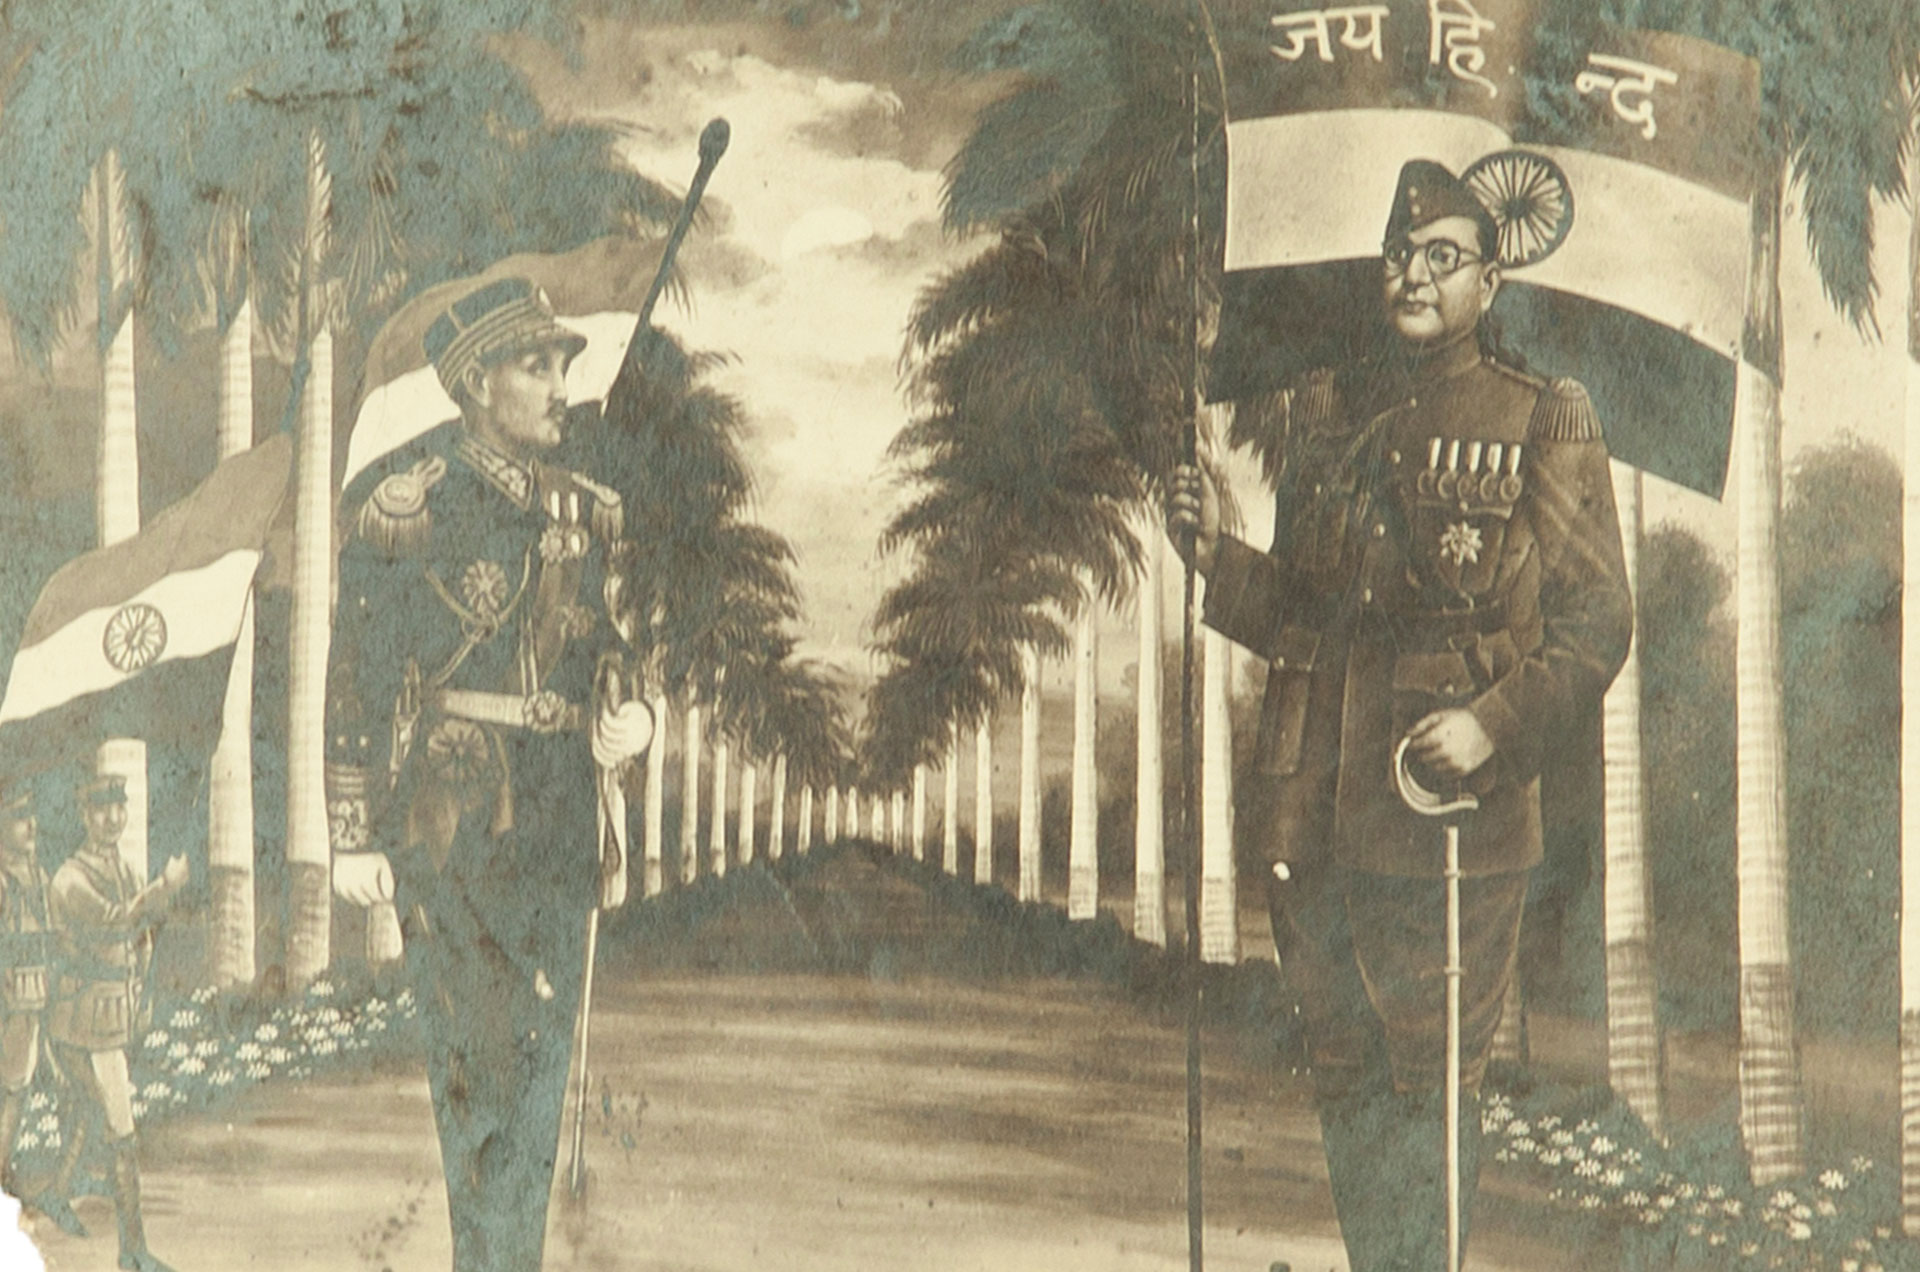 On the right is Subhas Chandra Bose holding the Indian flag. Opposite him, a soldier in dress uniform stands with the flag seen behind his head. They stand in between two long rows of trees. There are two soldiers in the background bottom left corner, one of whom holds a flag as well.